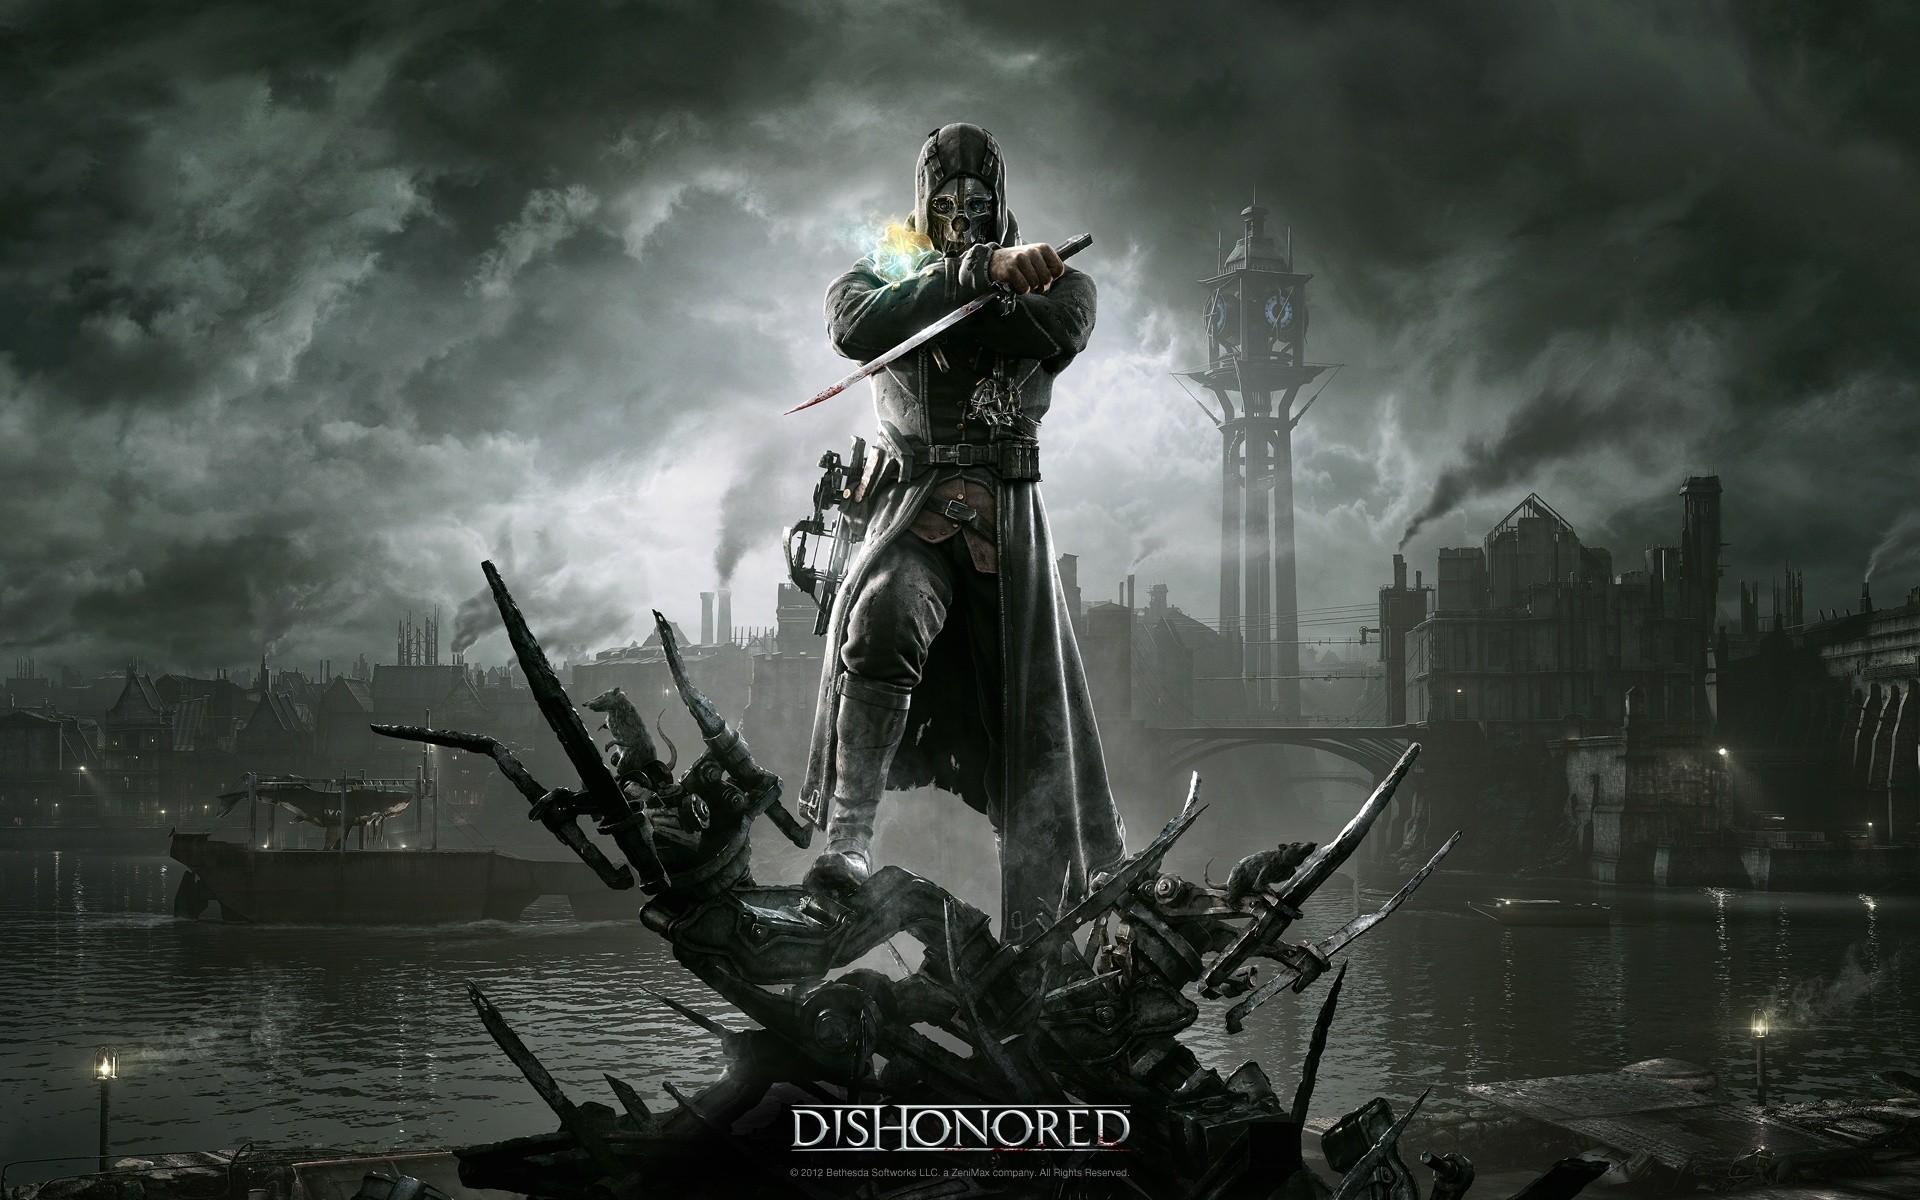 video_games_assassins_dark_steampunk_boats_masks_knives_rivers_mice_bethesda_softworks_rat_dishonored_cities_clocktowers_game_HD_Wallpapers.jpg